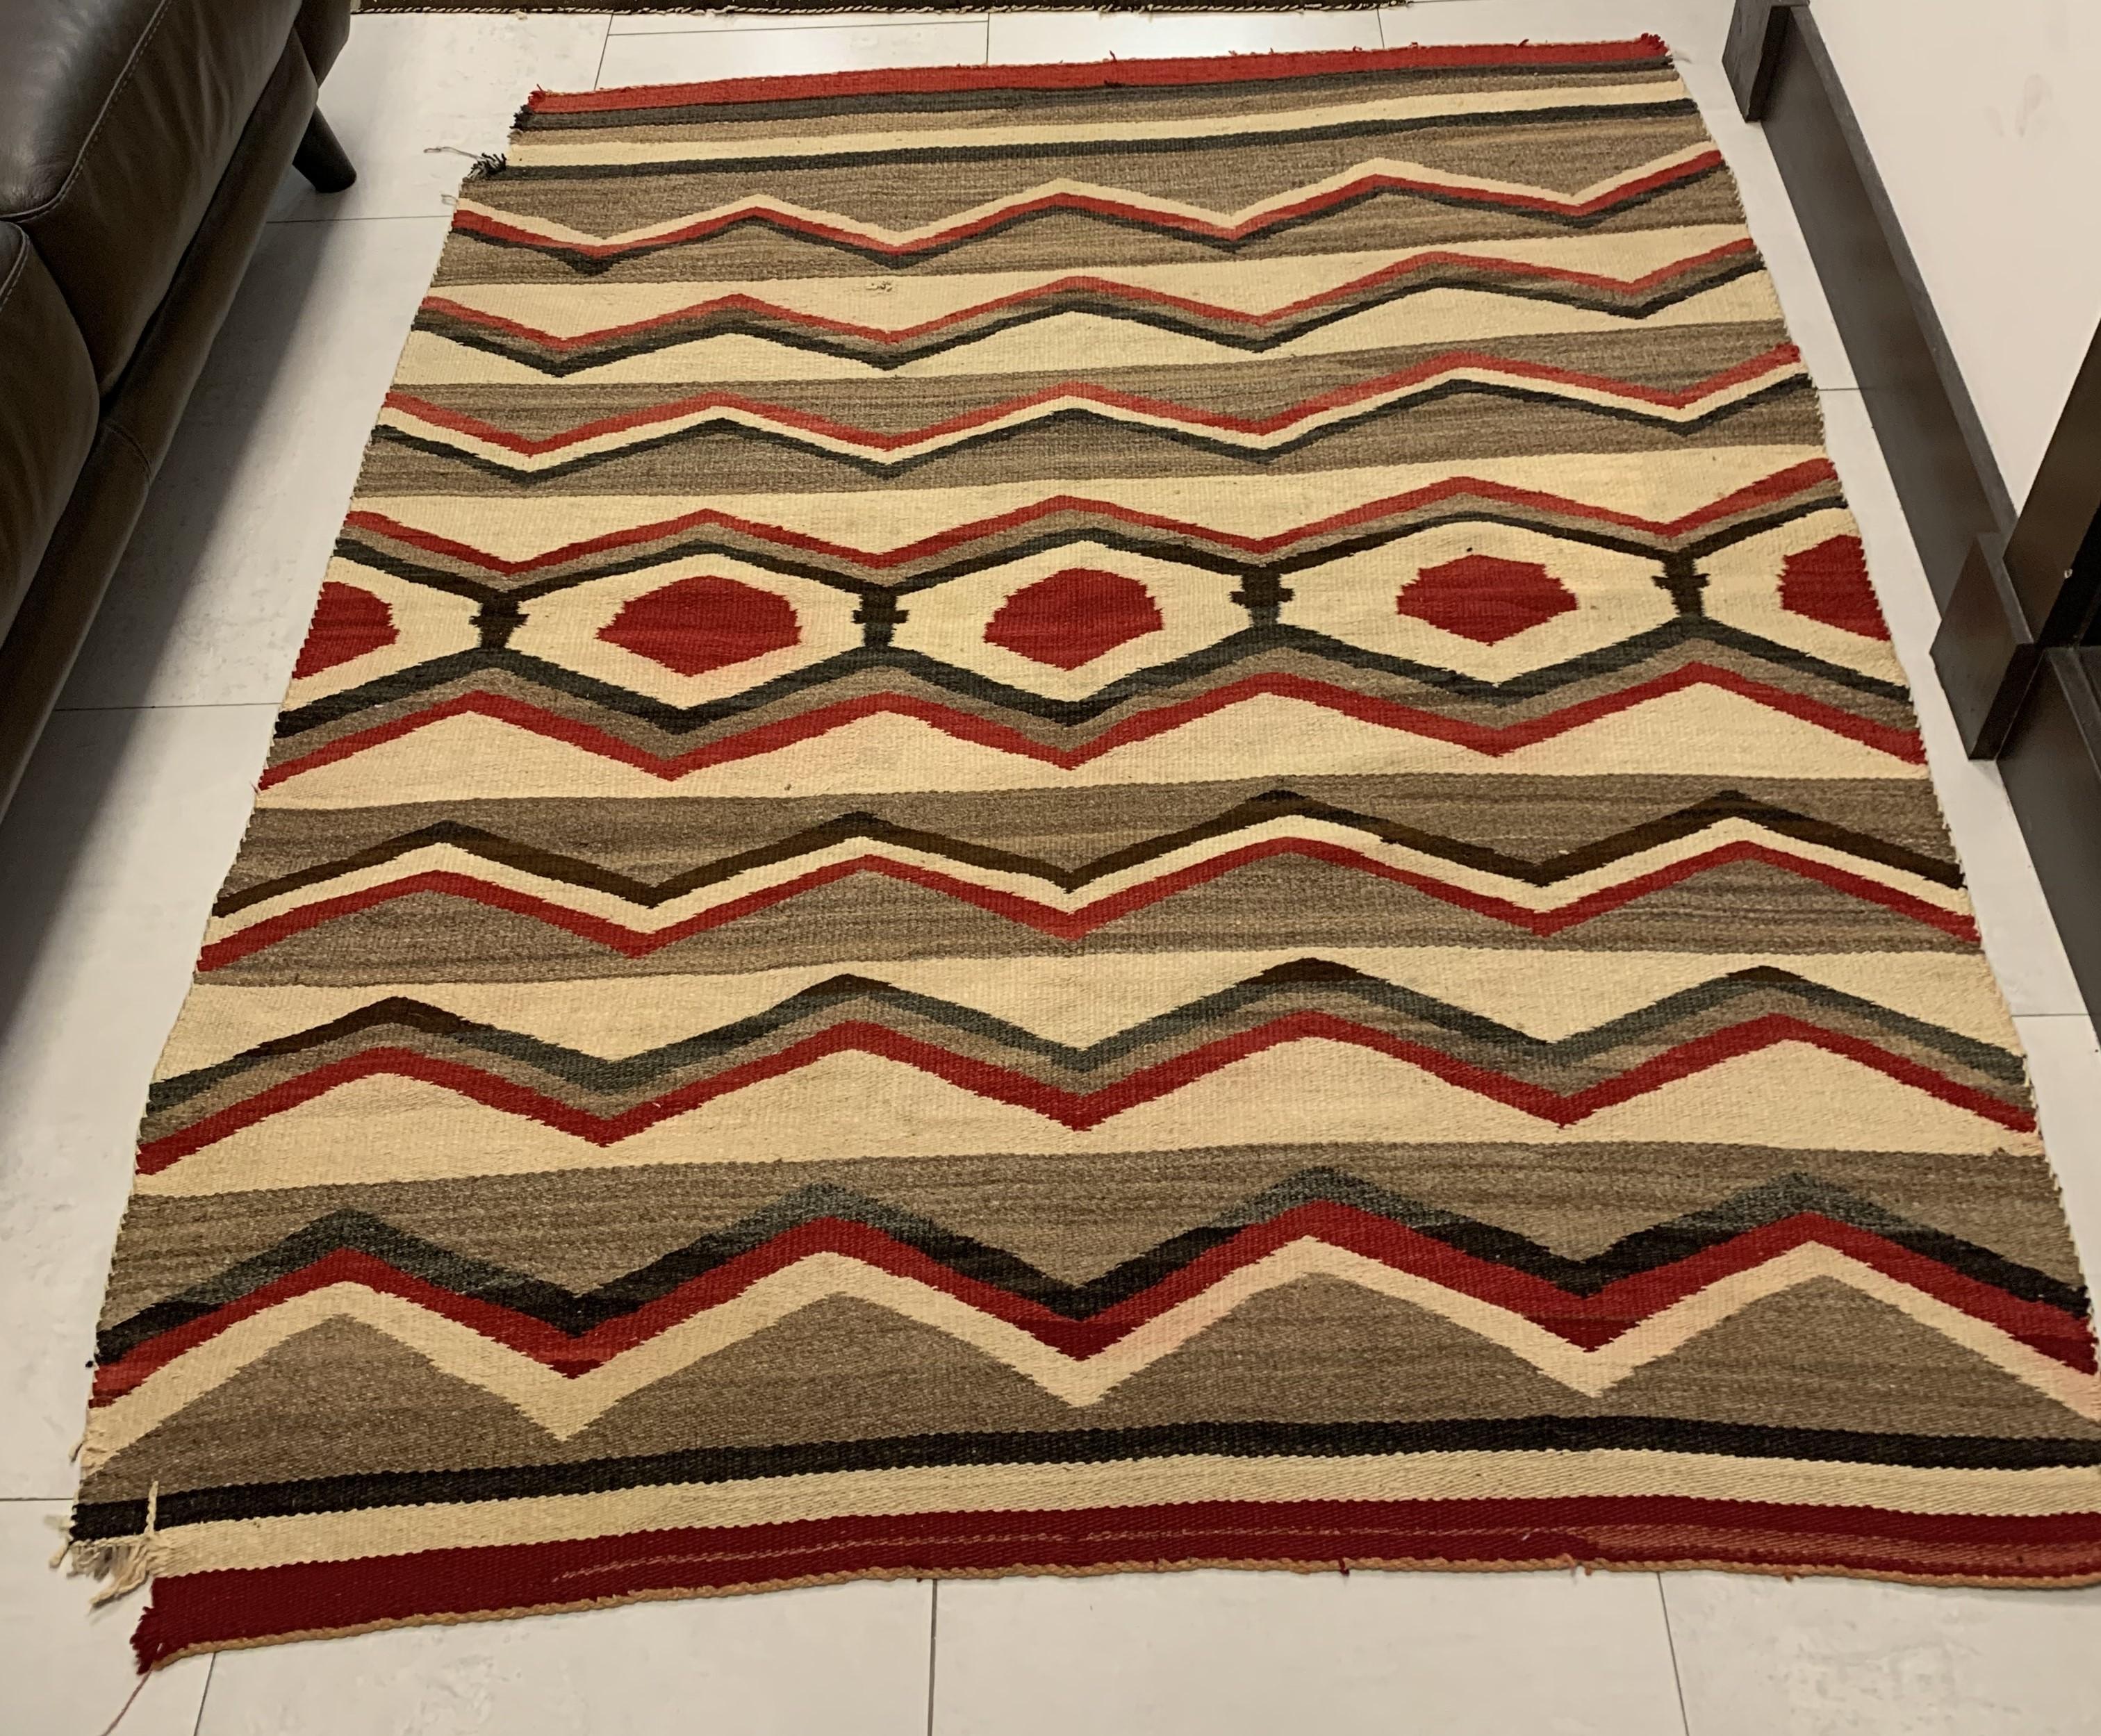 Introducing our Handmade Antique Native American Navajo Rug Blanket, a captivating piece steeped in history. Measuring 4.6’ x 5.4’ (140cm x 164cm), this rug from the early 1900s bears the marks of time, including damage to one corner.

Colors &